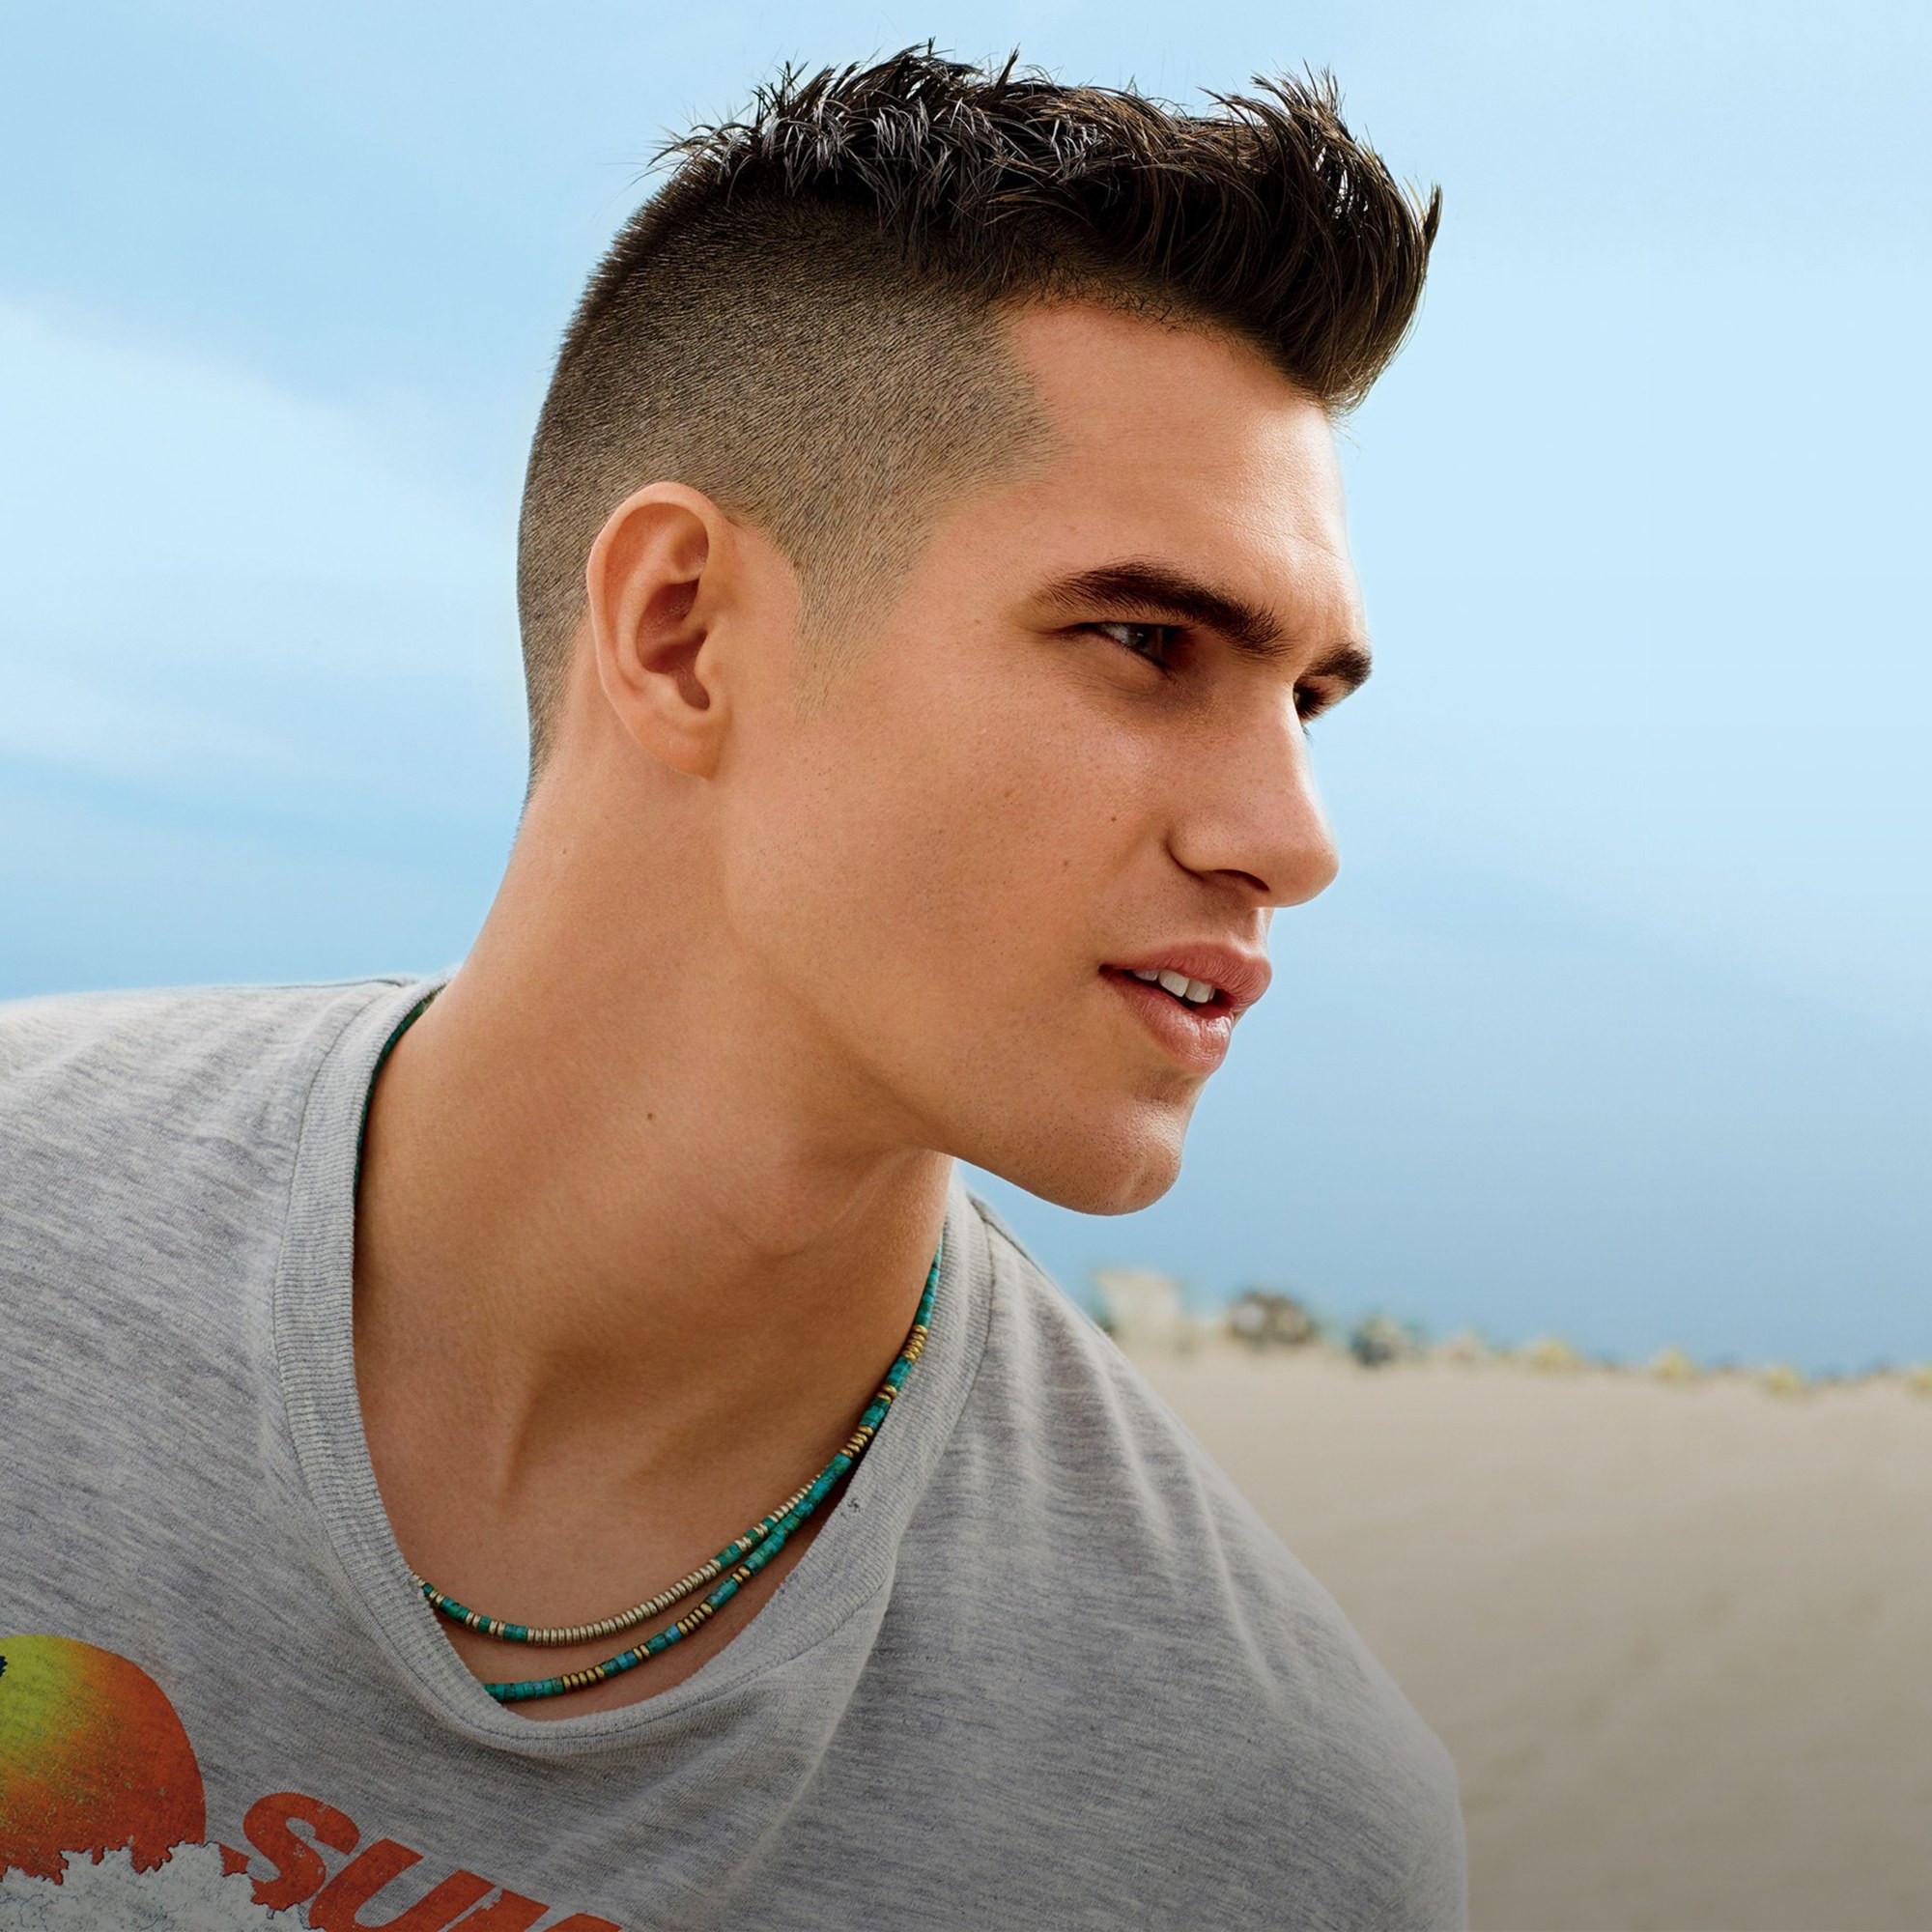 Mens Summer Haircuts
 The Summer Haircut That Every Man Should Try